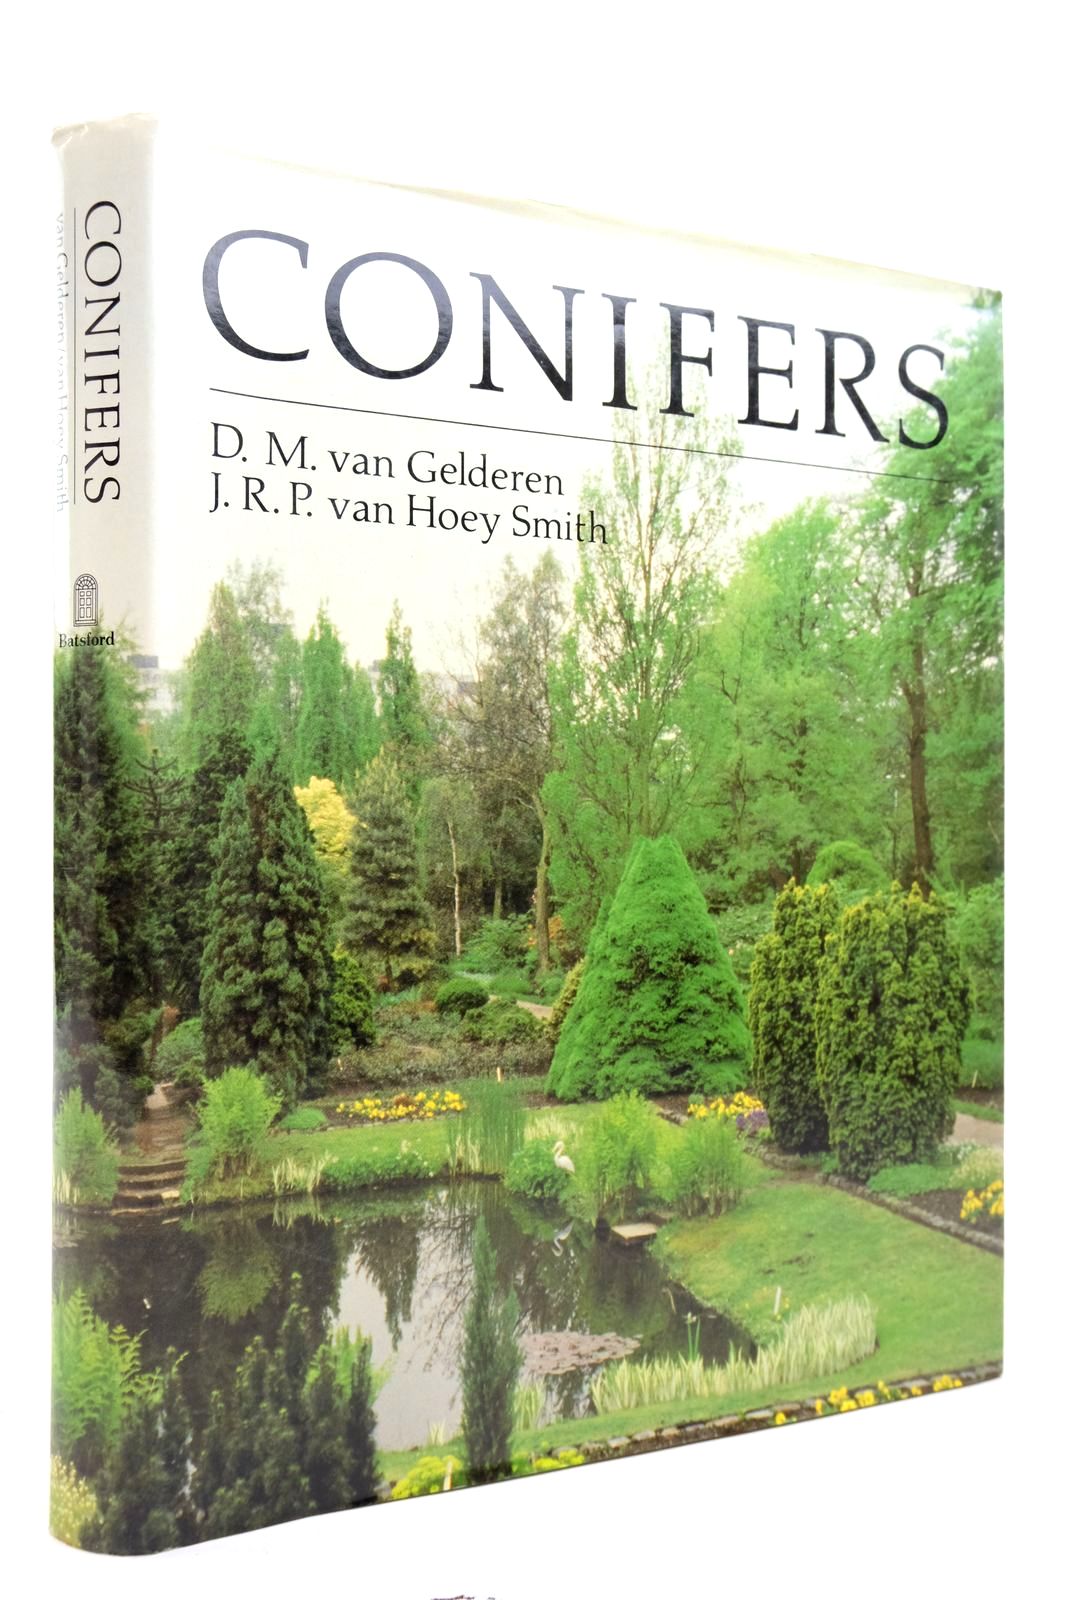 Photo of CONIFERS written by Van Gelderen, D.M. published by B.T. Batsford Ltd. (STOCK CODE: 2139135)  for sale by Stella & Rose's Books